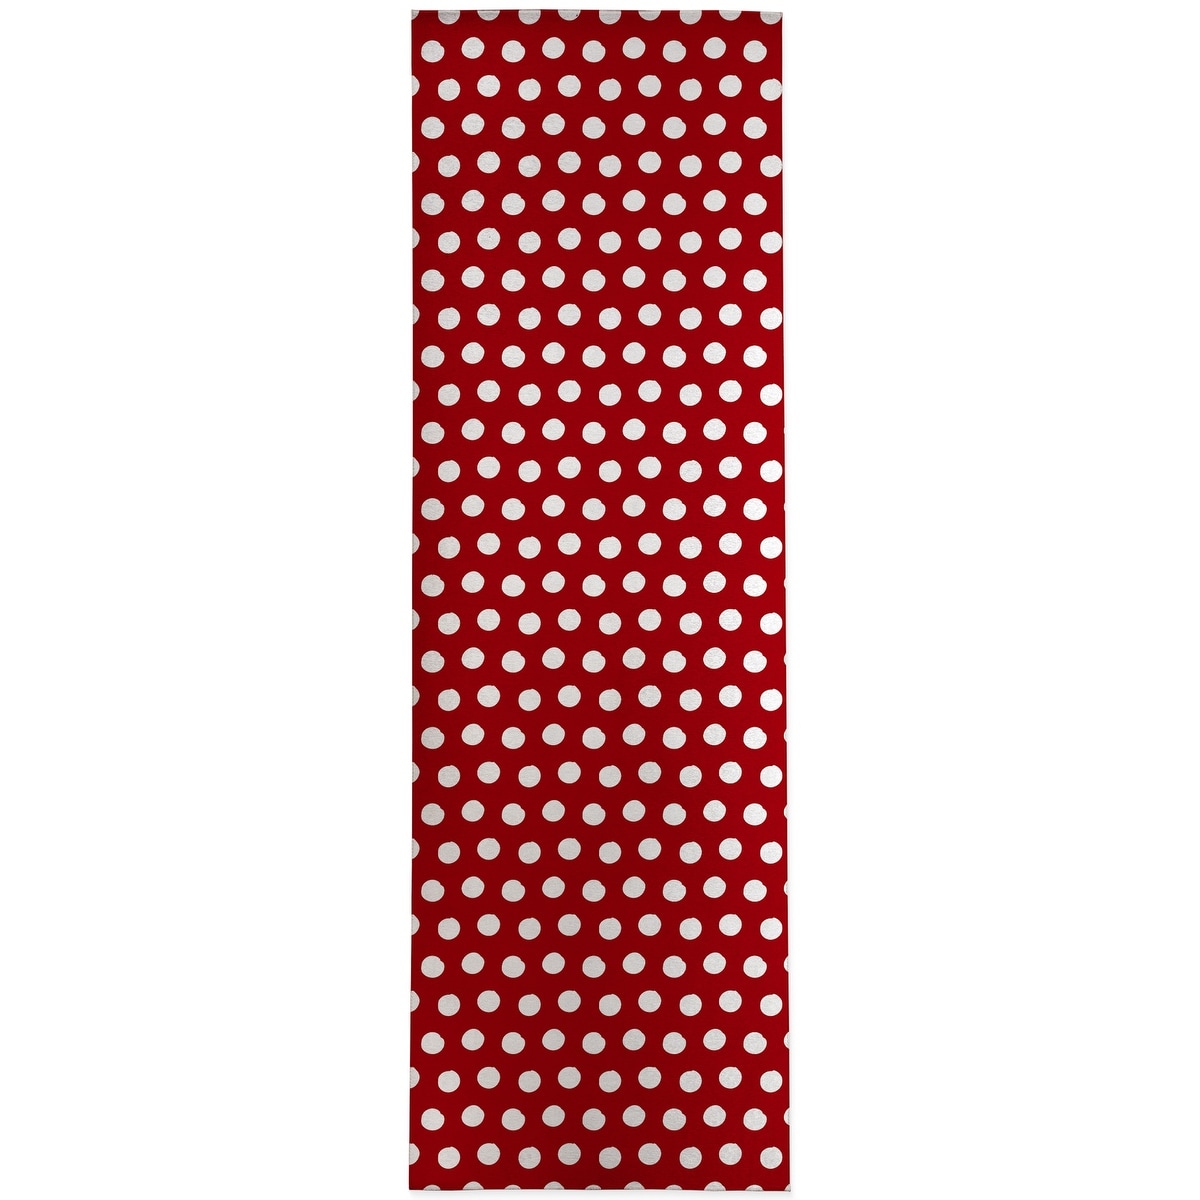 https://ak1.ostkcdn.com/images/products/is/images/direct/f4ad678382ae98d0536ea5effc8342e954da4c19/BIG-POLKA-DOTS-RED-Kitchen-Mat-by-Kavka-Designs.jpg